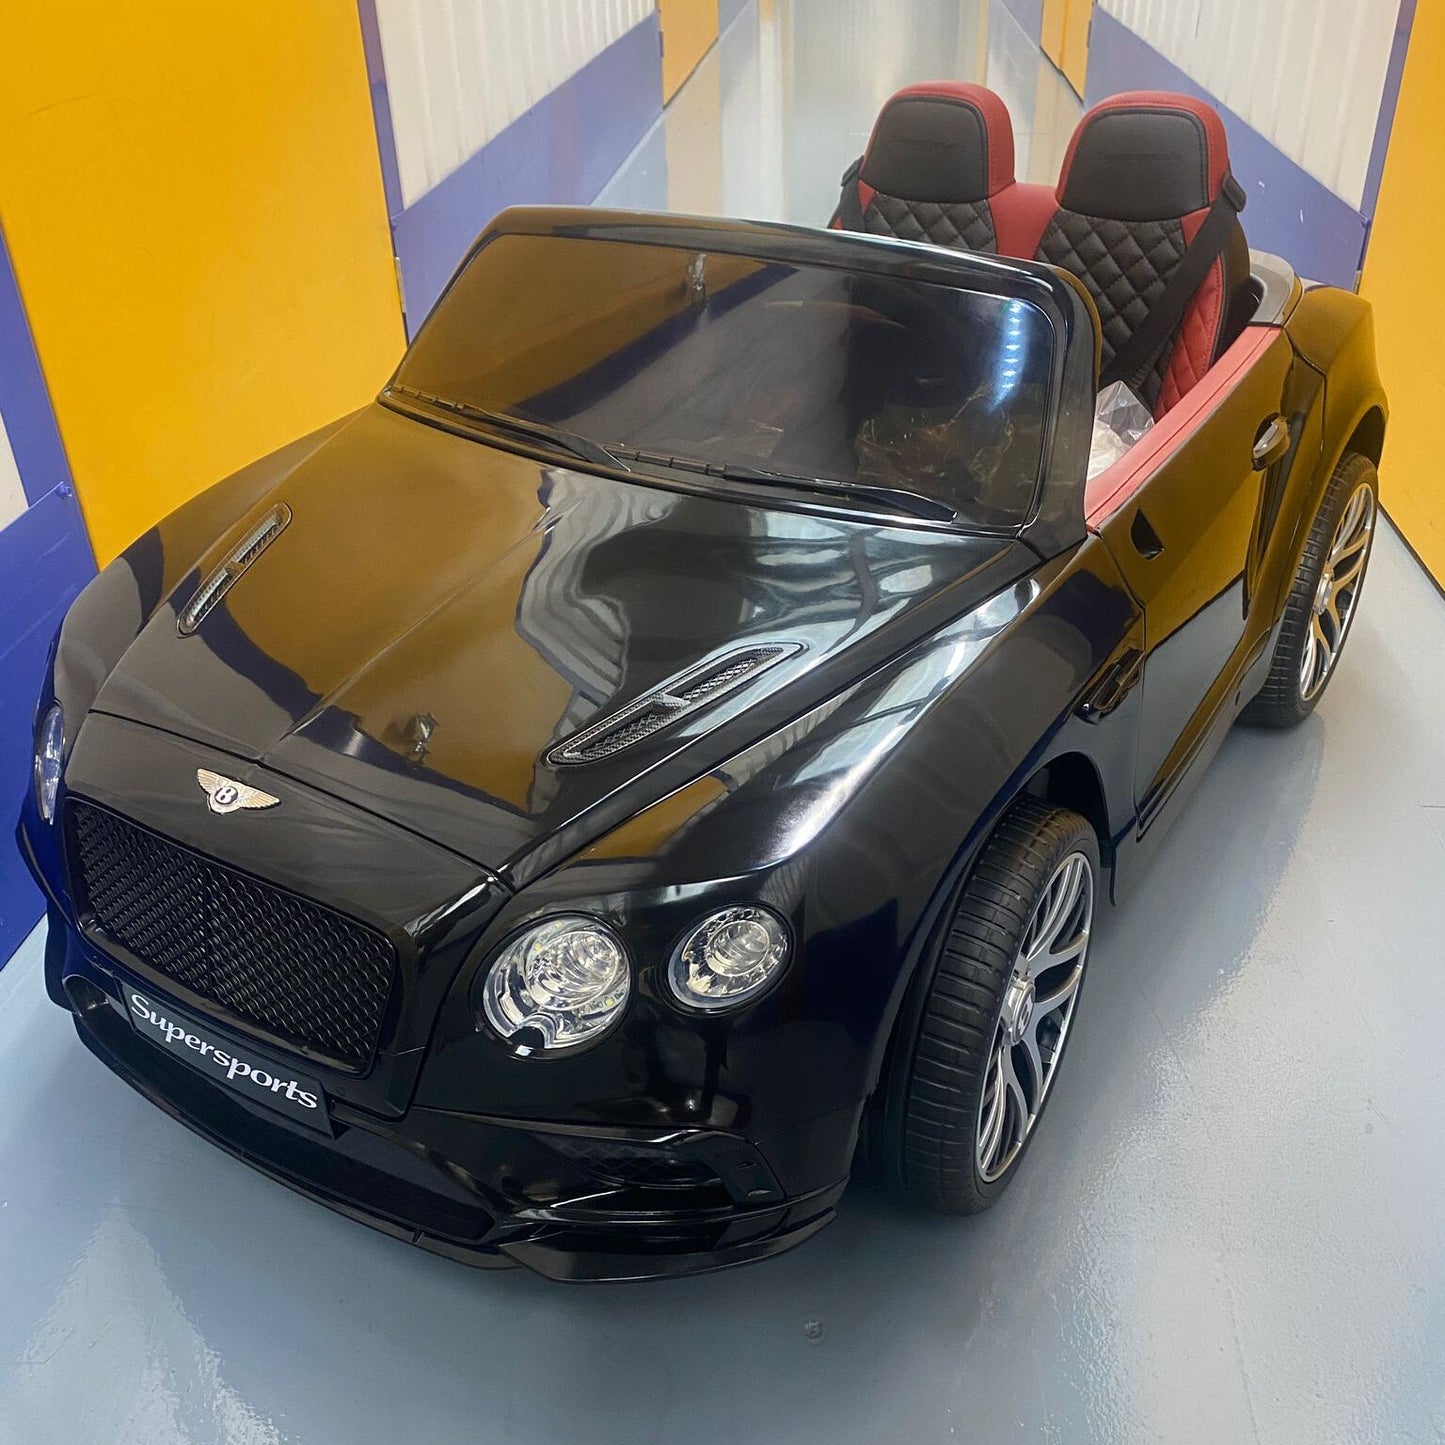 Bentley Continental Sports Two Seats 12v Kids Ride On Car with Remote - Black